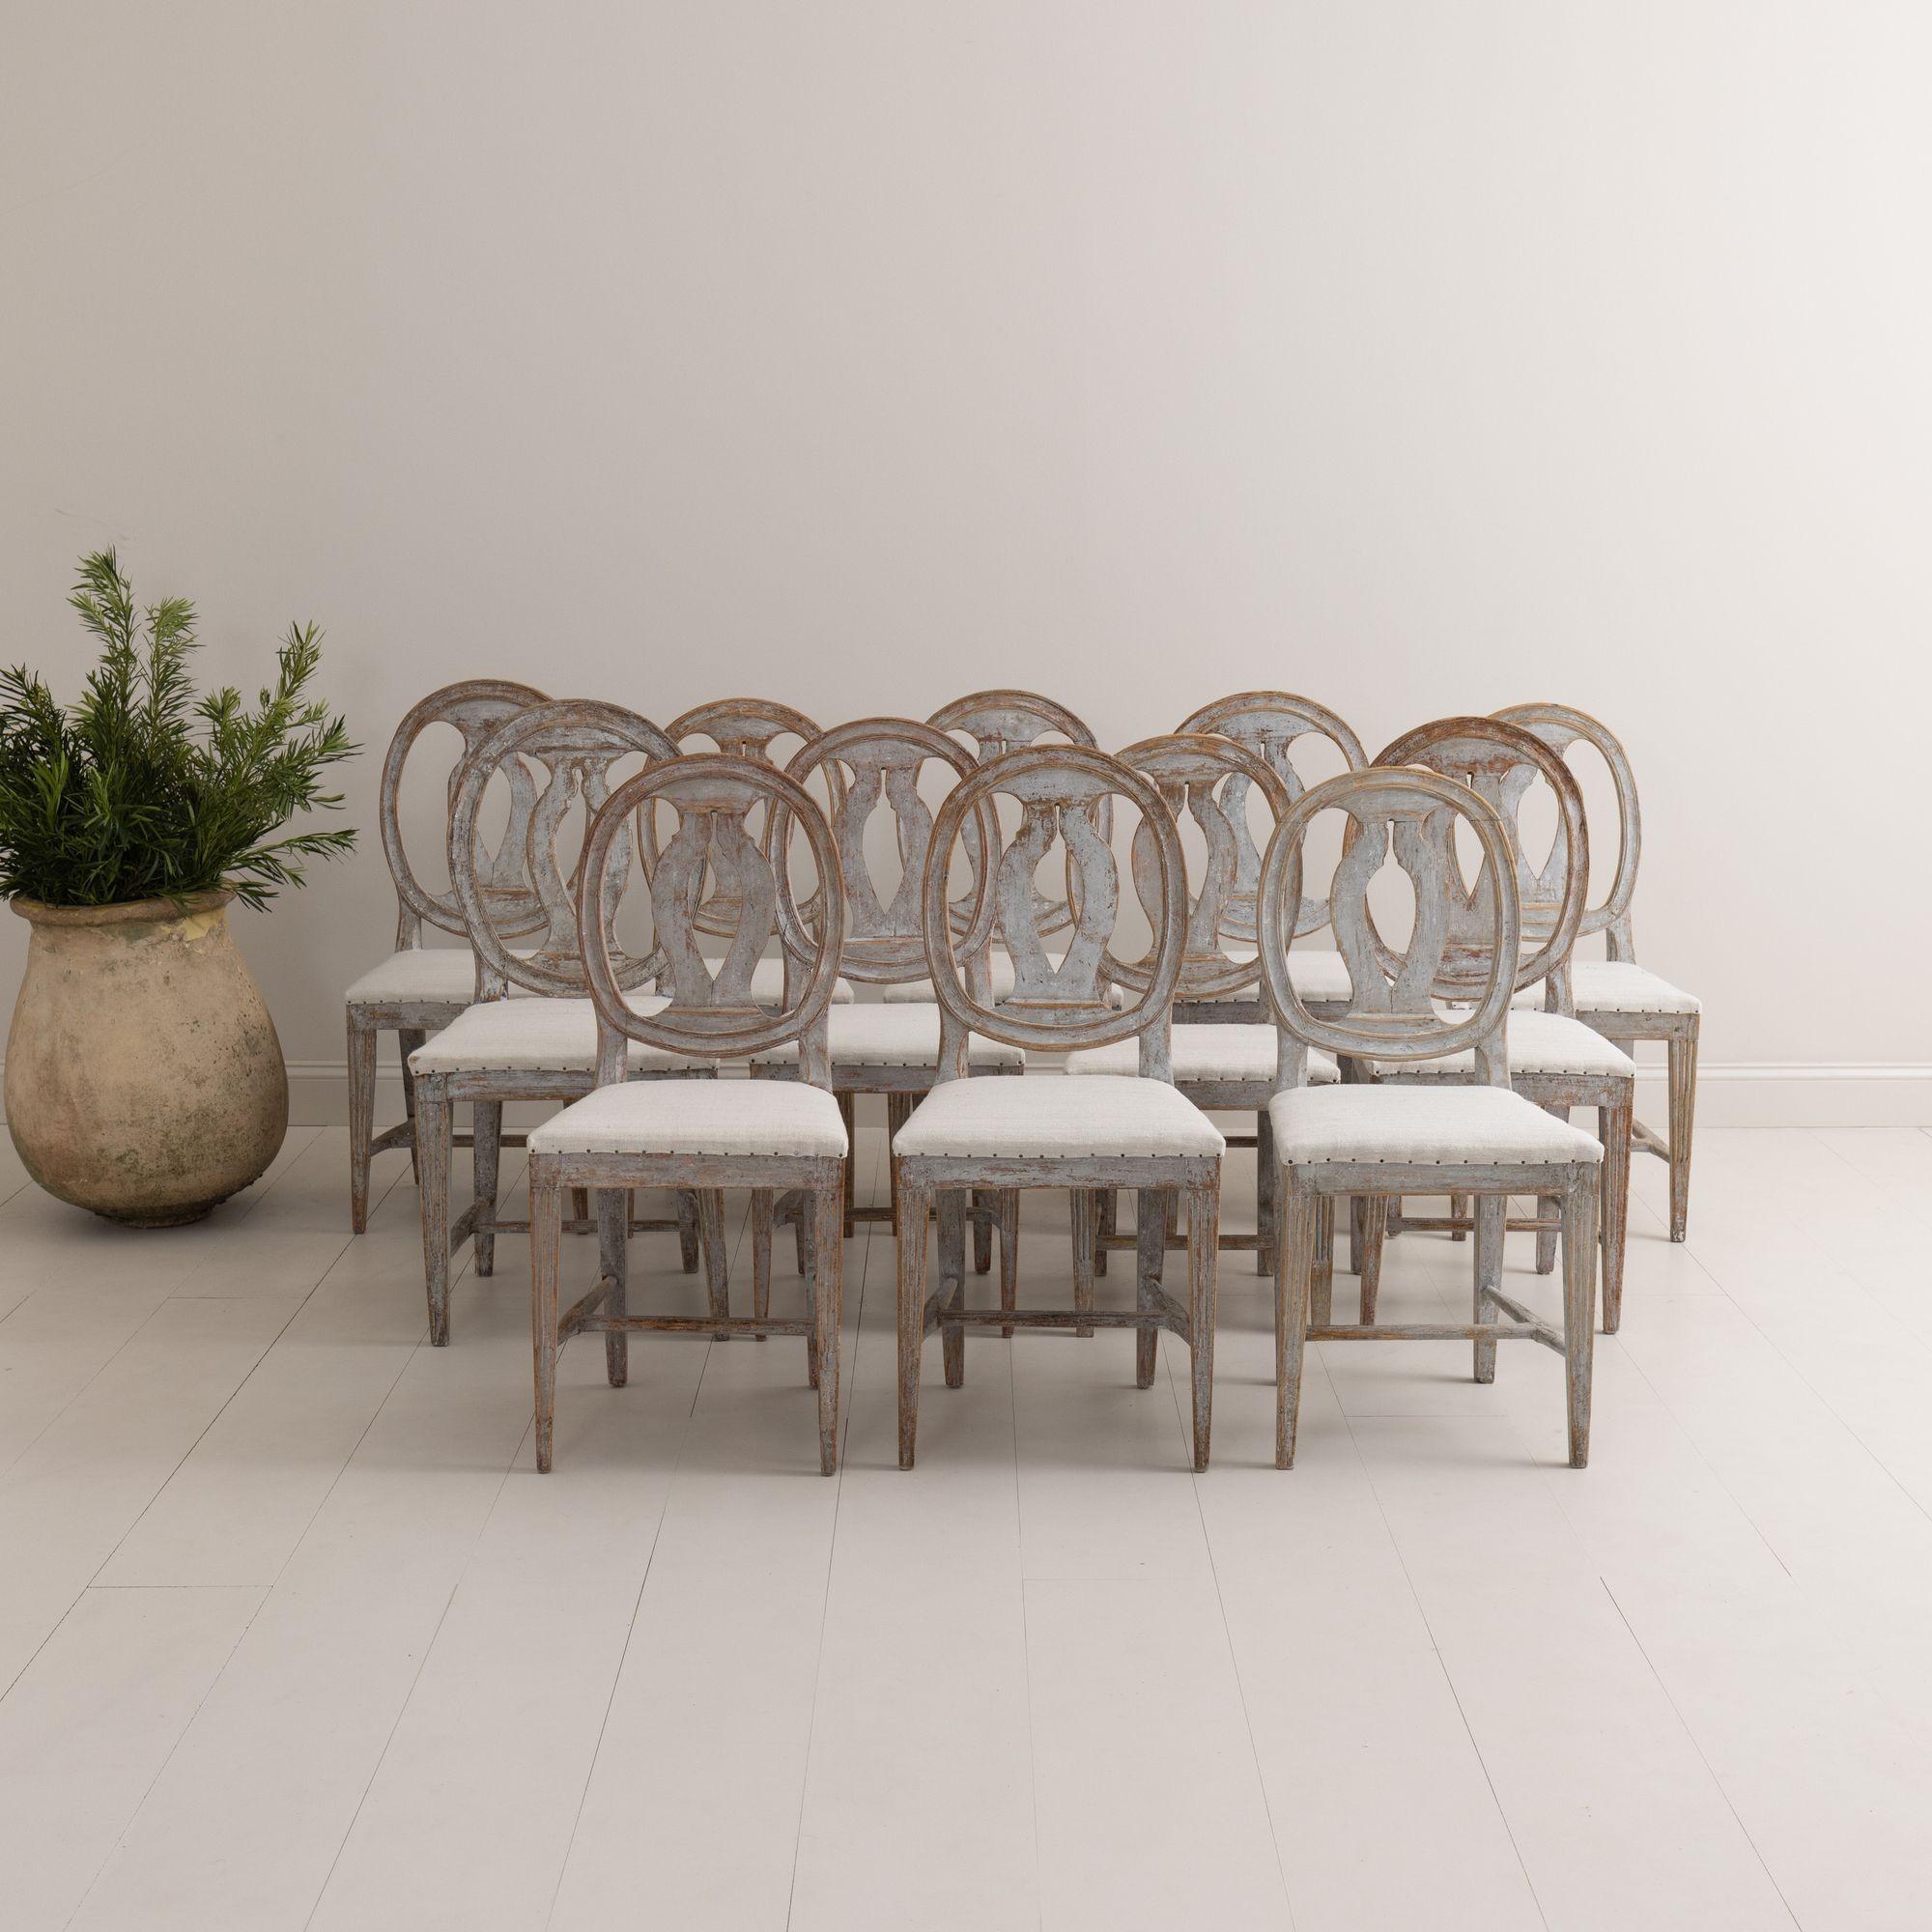 A collection of twelve similar 'Swedish Model' chairs from the Gustavian period, hand-scraped to the original paint surface and newly upholstered in linen. These beautiful, provincial chairs have oval pierced backs and fluted legs with cross